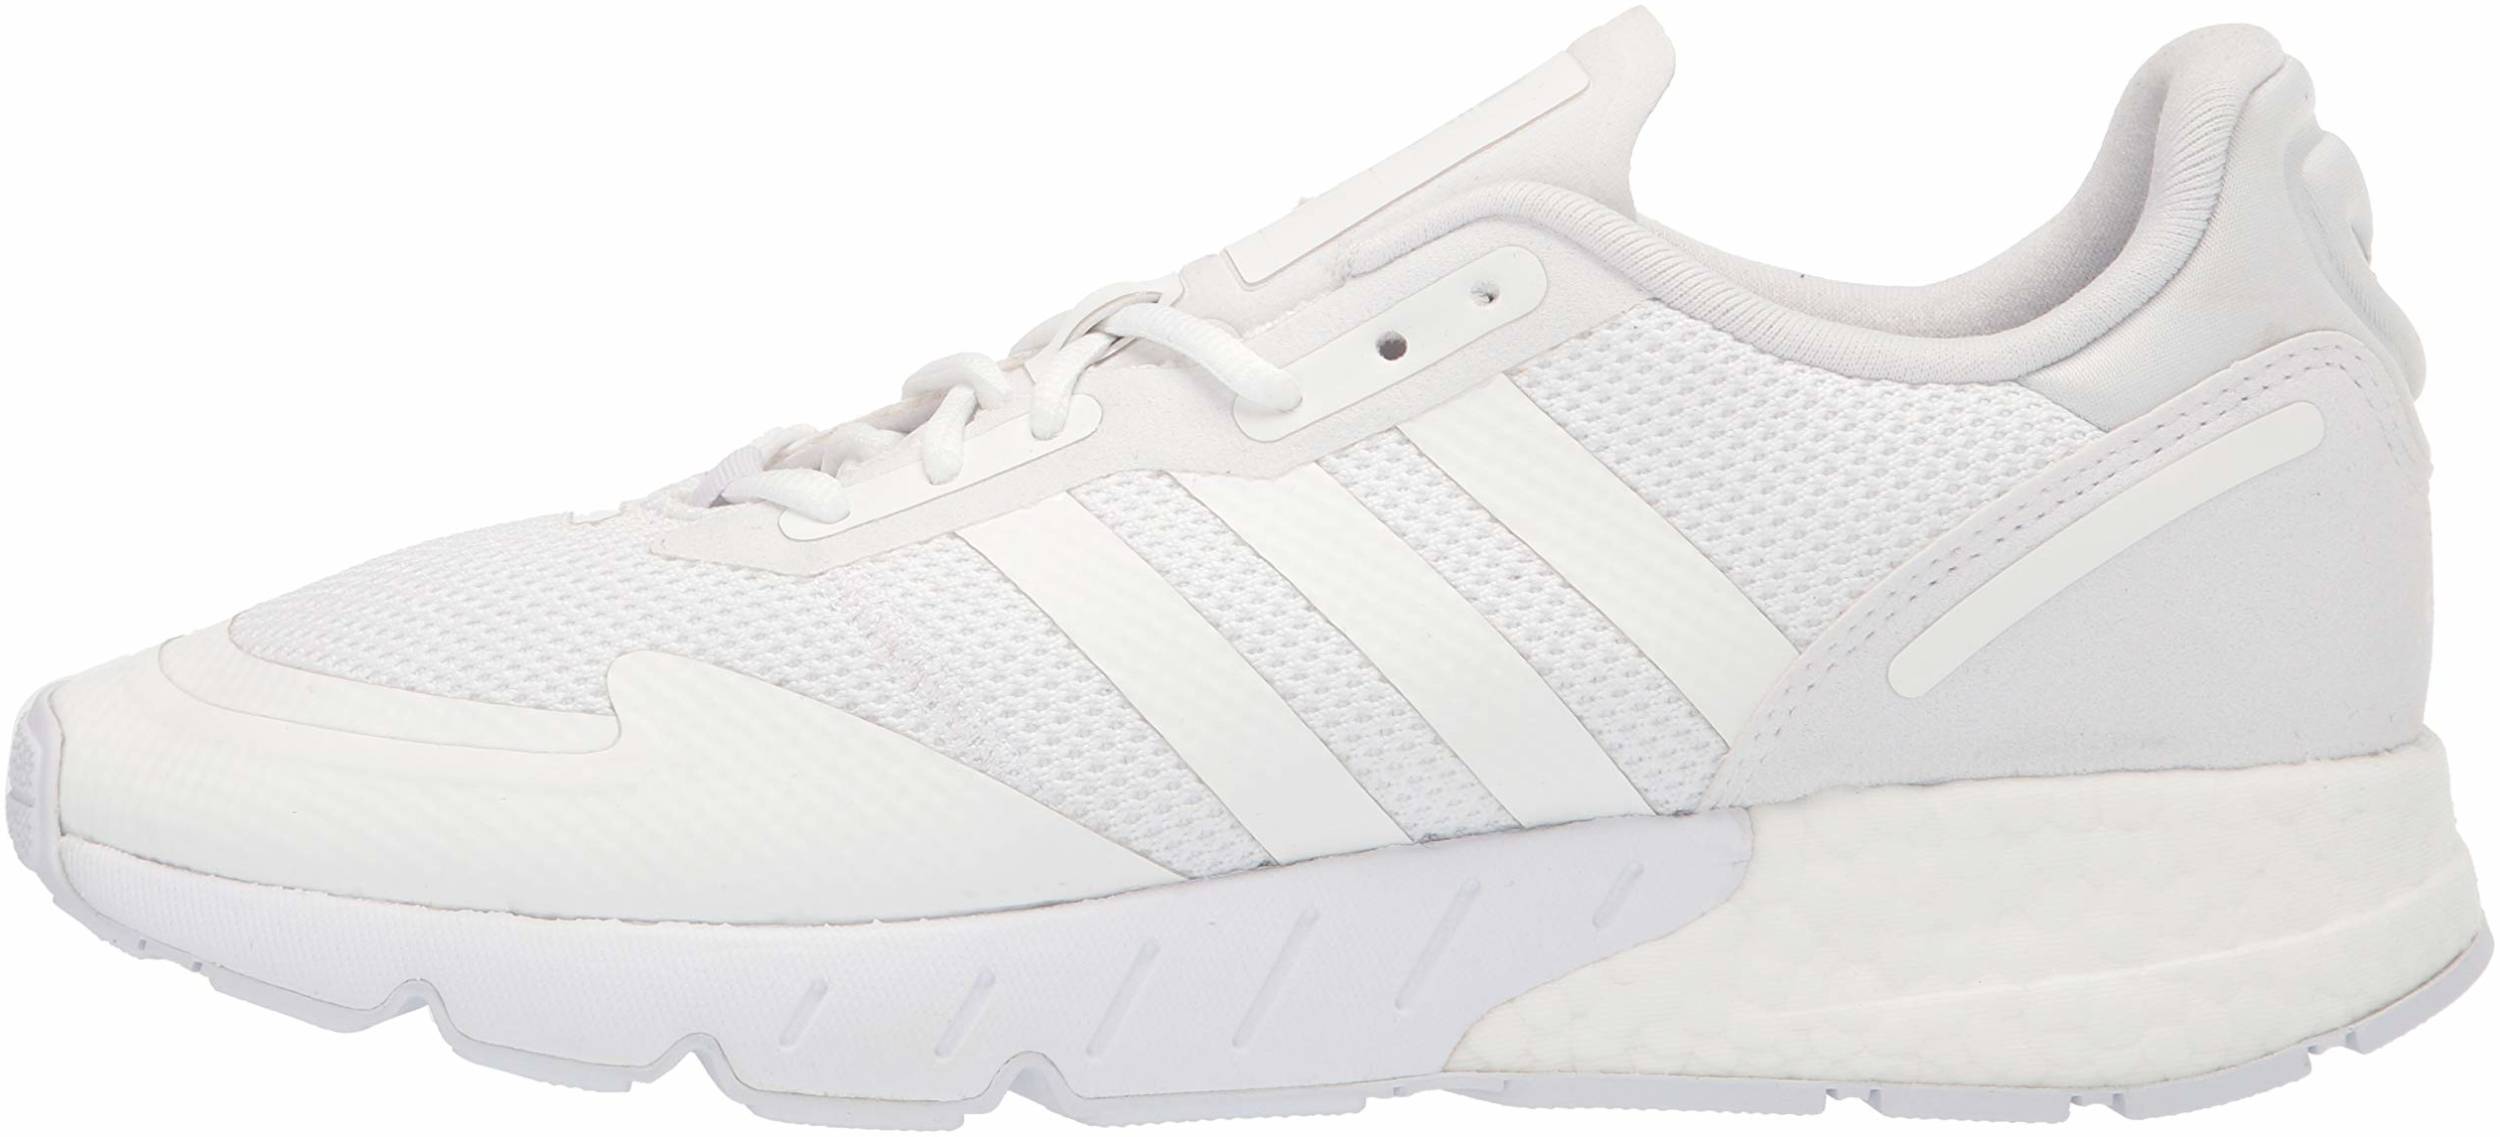 Adidas ZX 1K Boost sneakers in 10+ colors (only $34) | RunRepeat